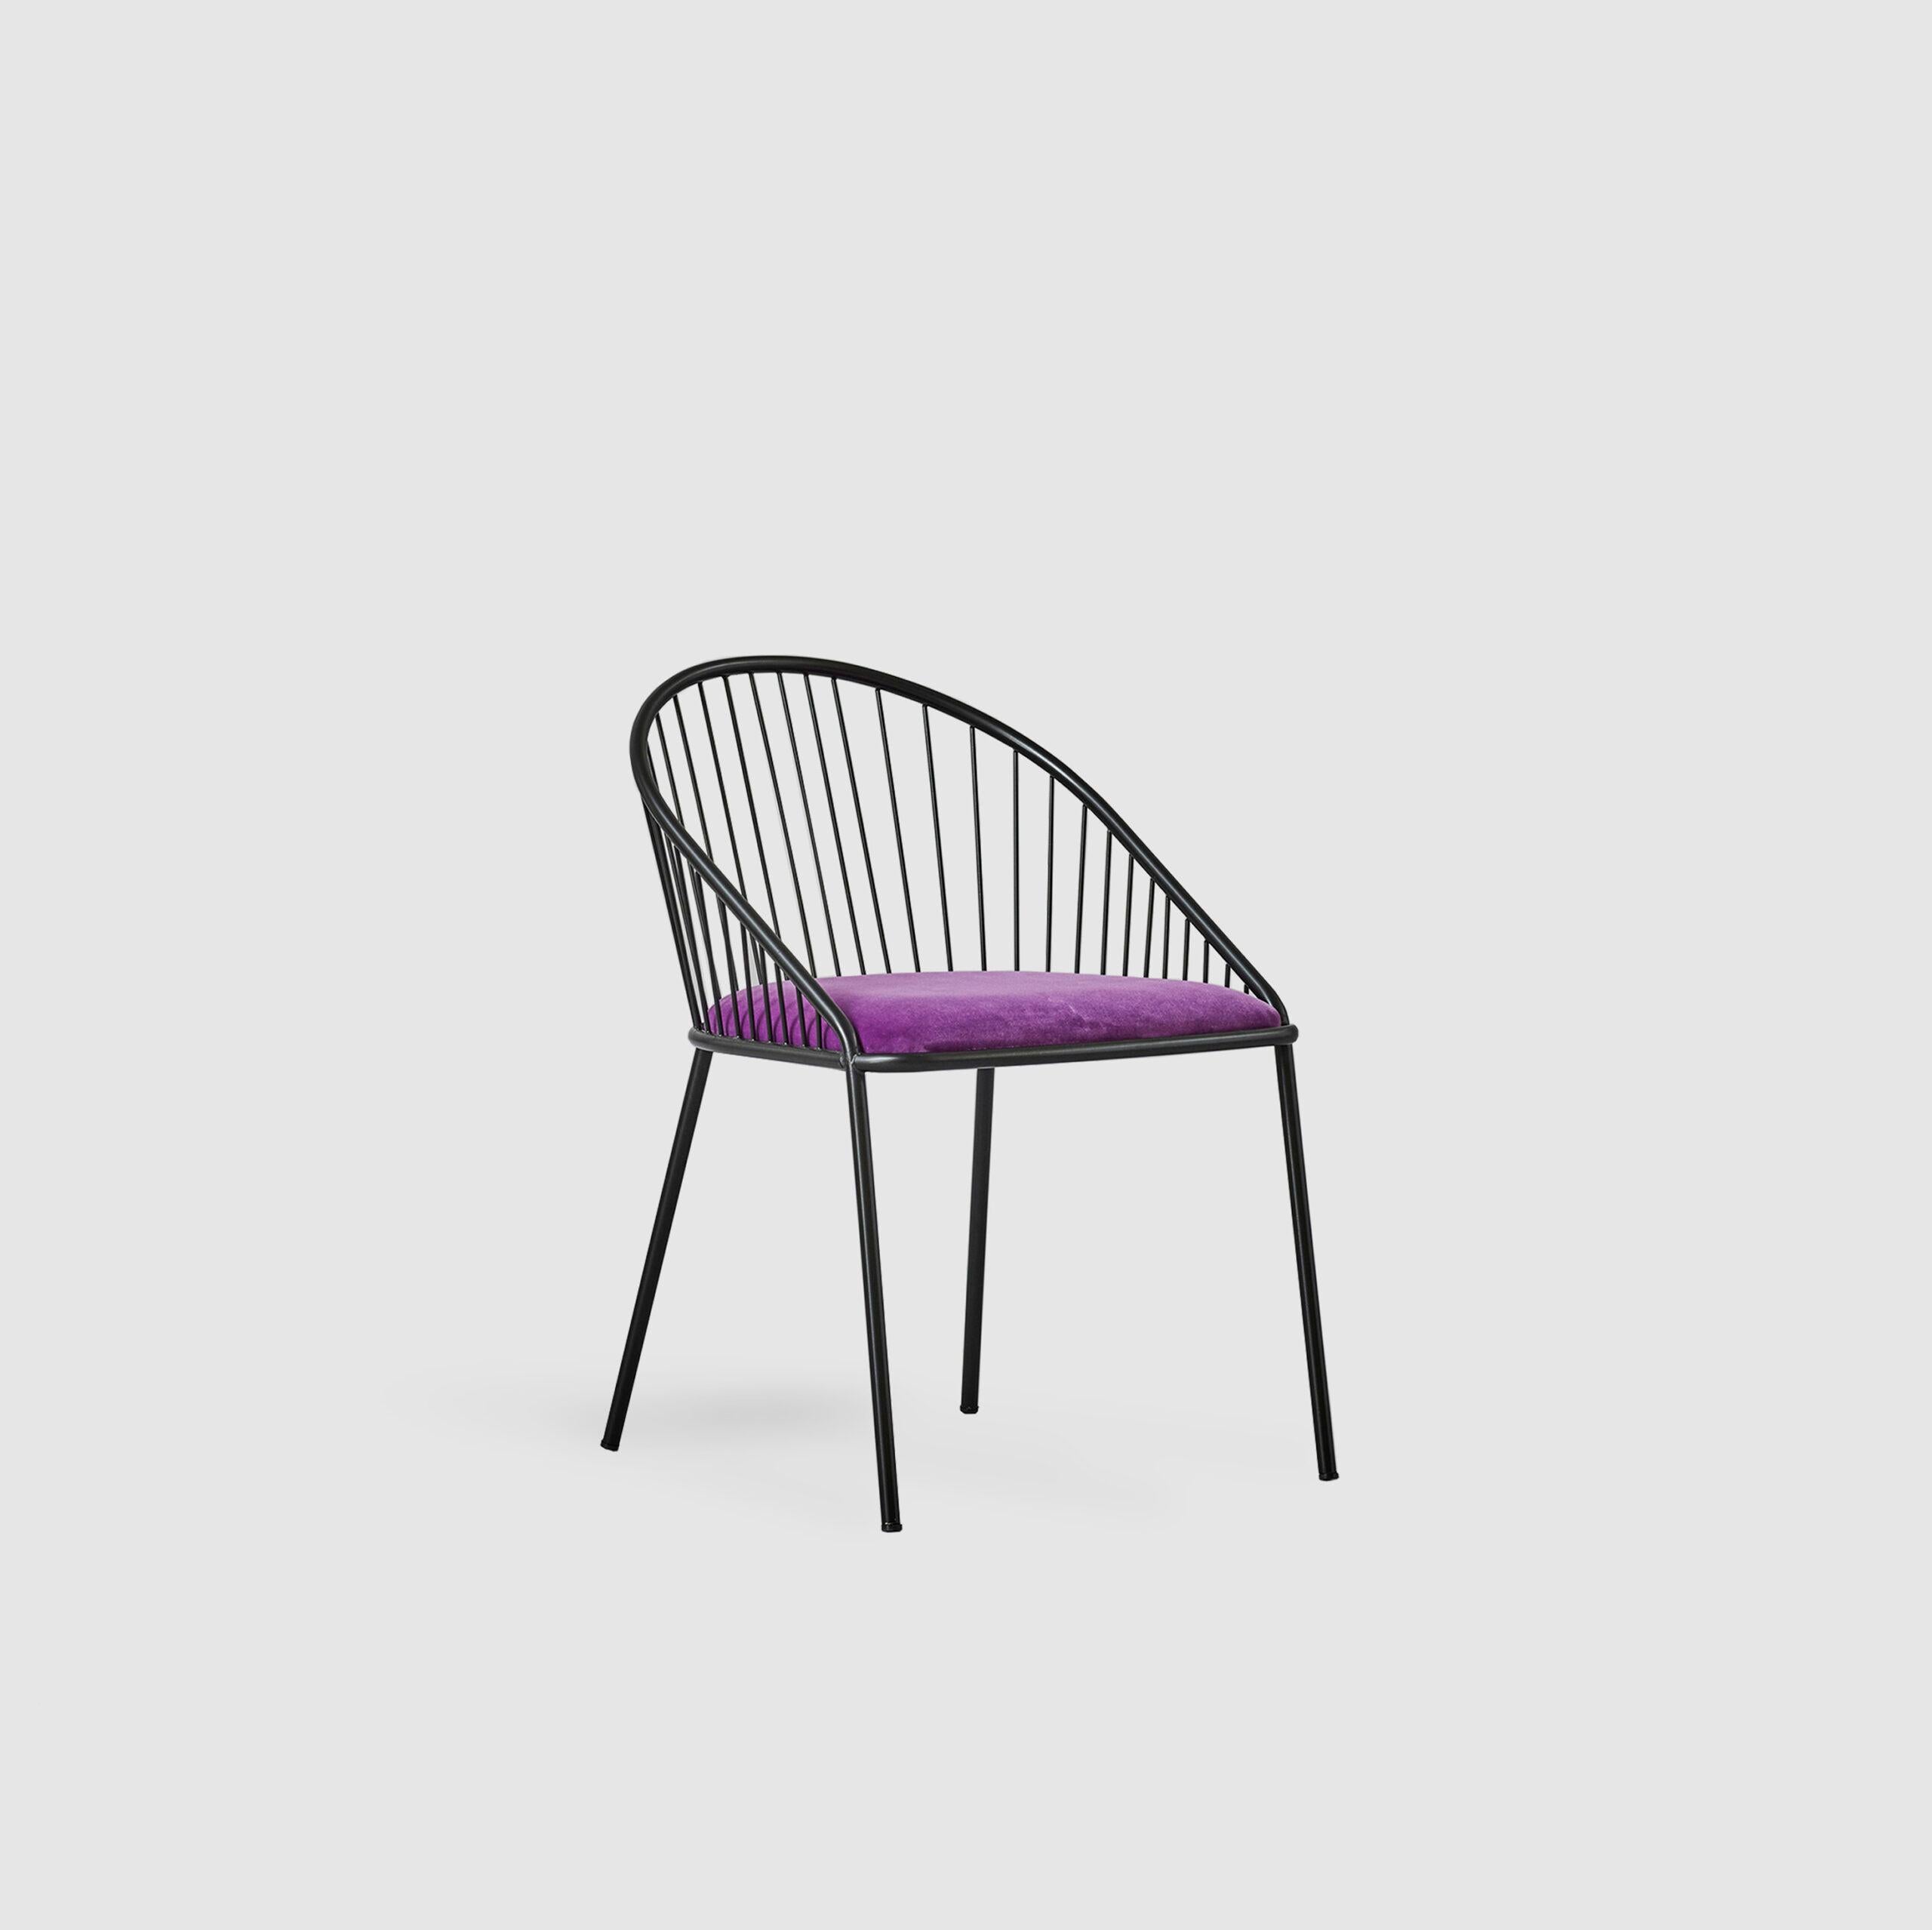 Agora chair by Pepe Albargues
Dimensions: W 54 x D 64 x H 79 cm
 Seat 46 cm
Materials: Iron strucutre and particles board.
 Foam CMHR (high resilience and flame retardant) 


Now suitable also for sheltered outdoor spaces.
Painted or chromed